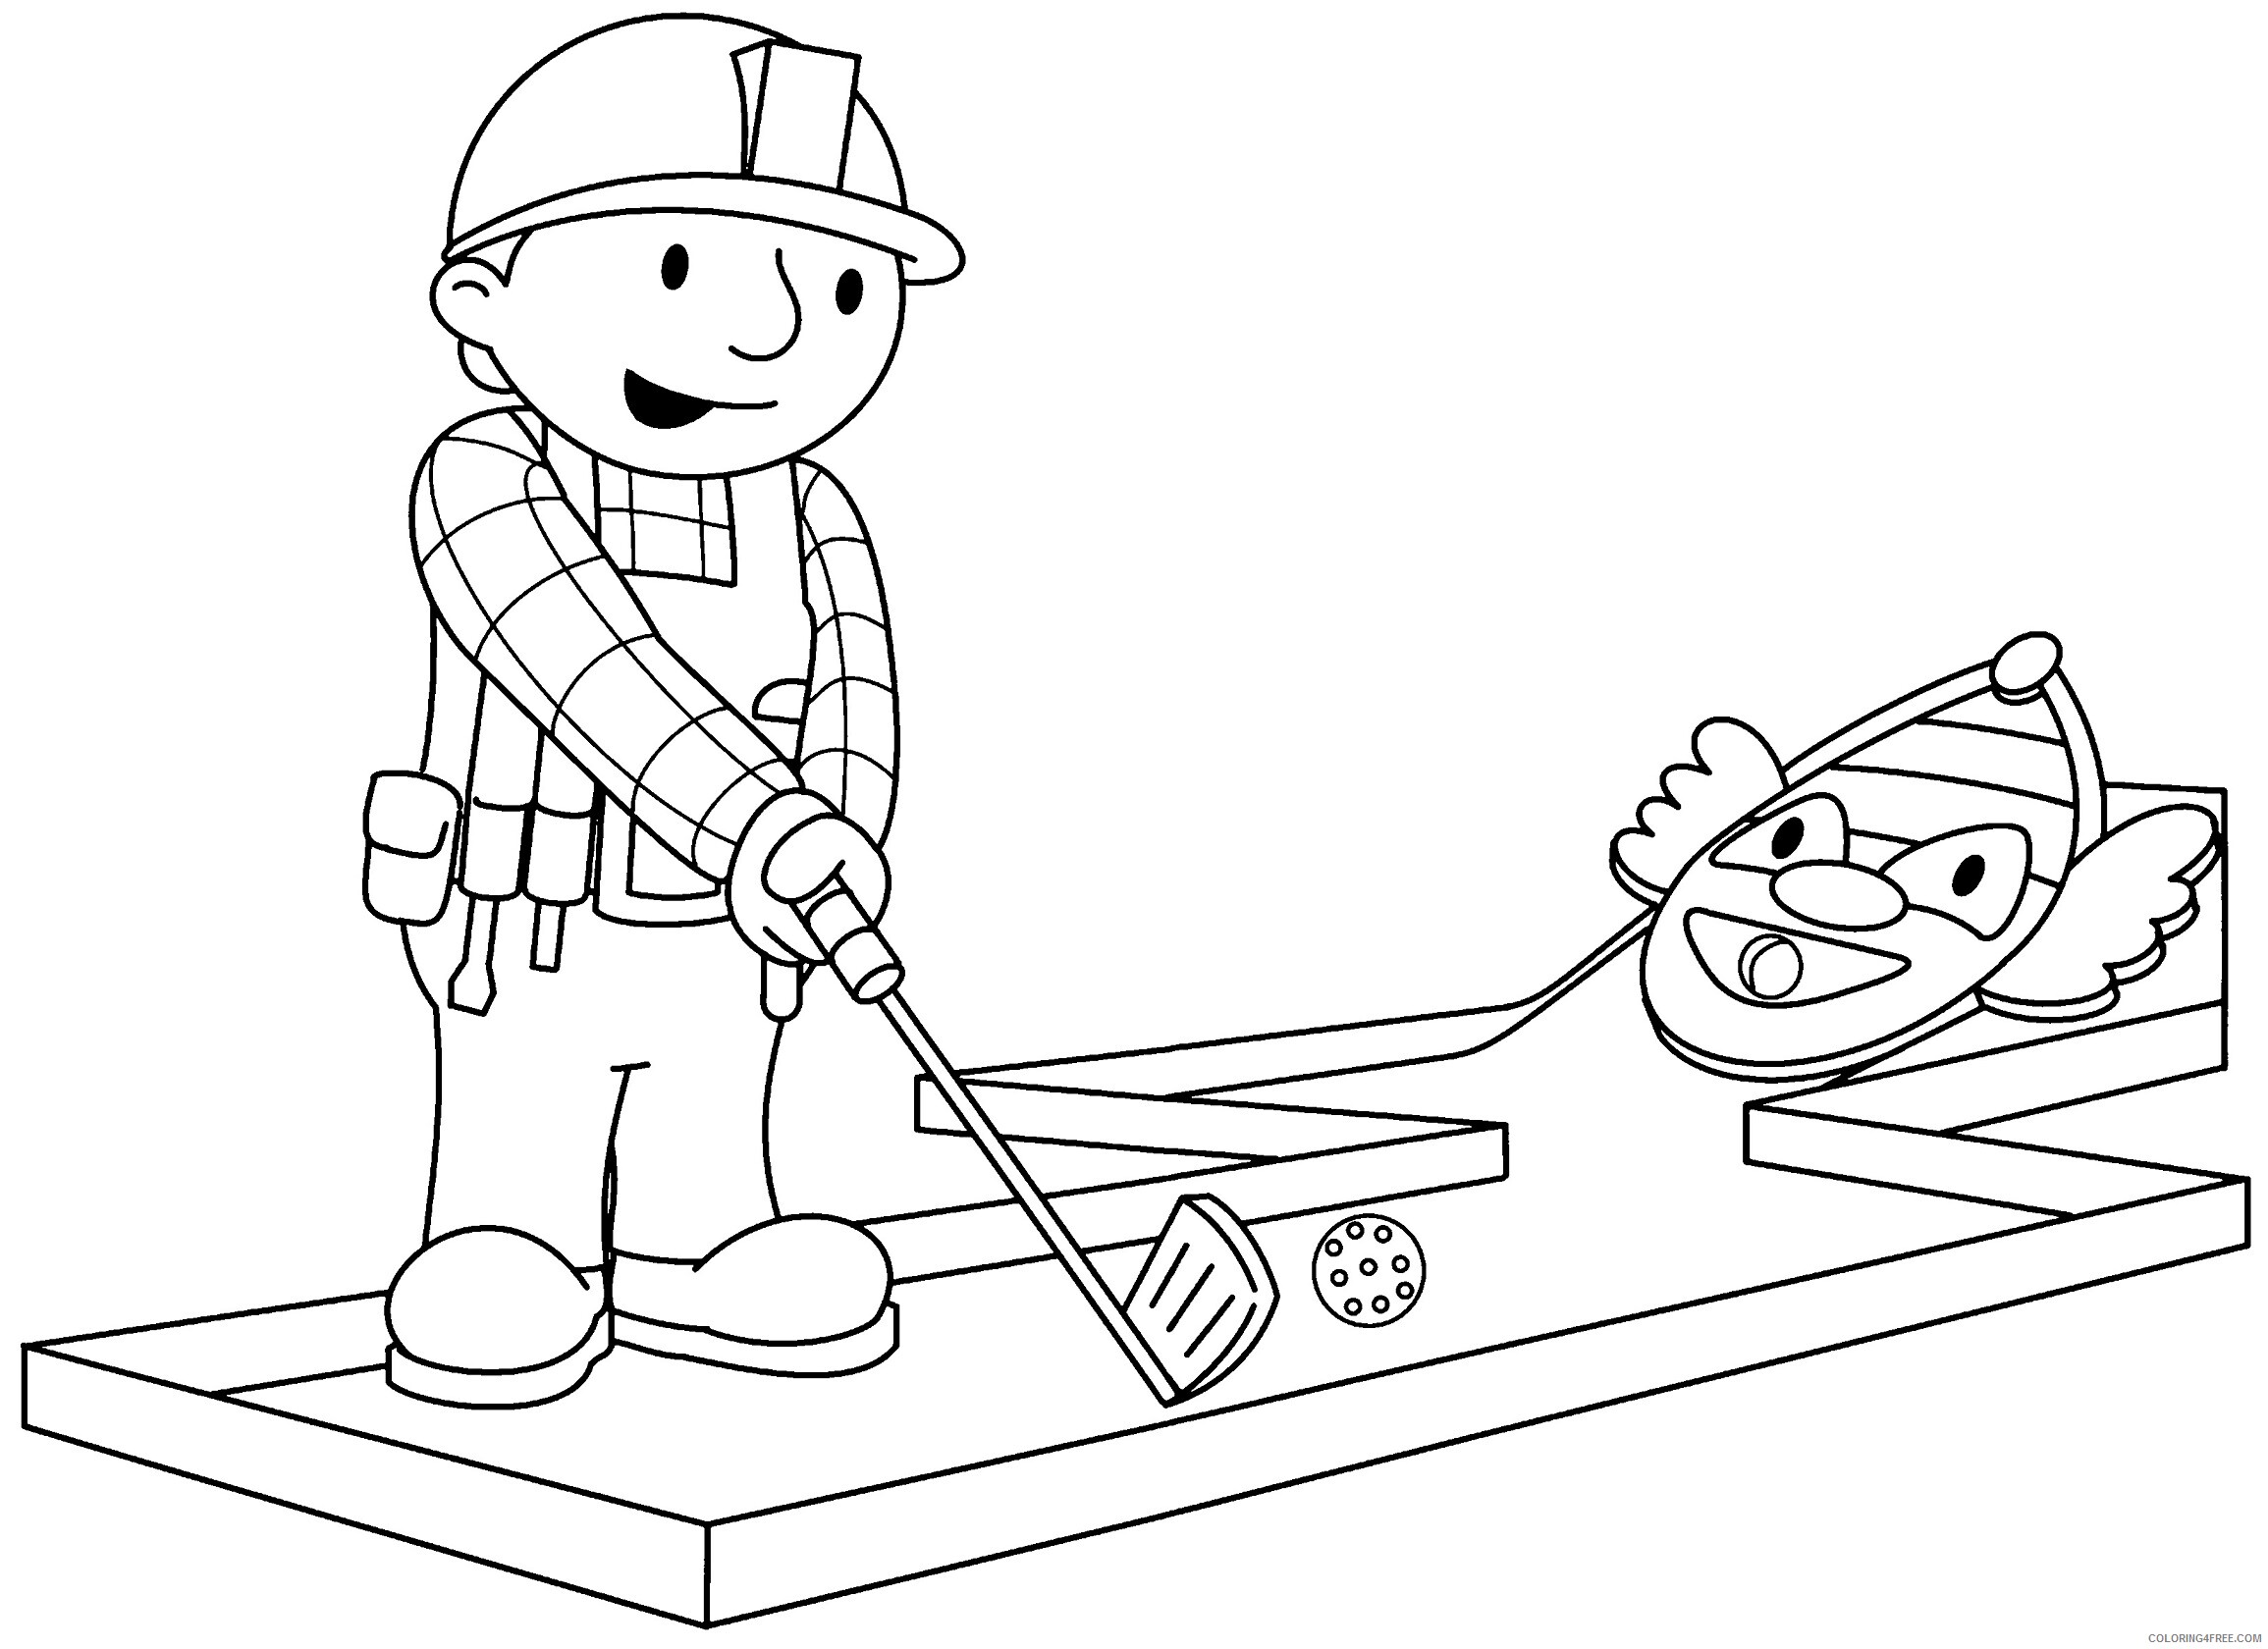 Bob the Builder Coloring Pages TV Film bob der baumeister Printable 2020 00945 Coloring4free